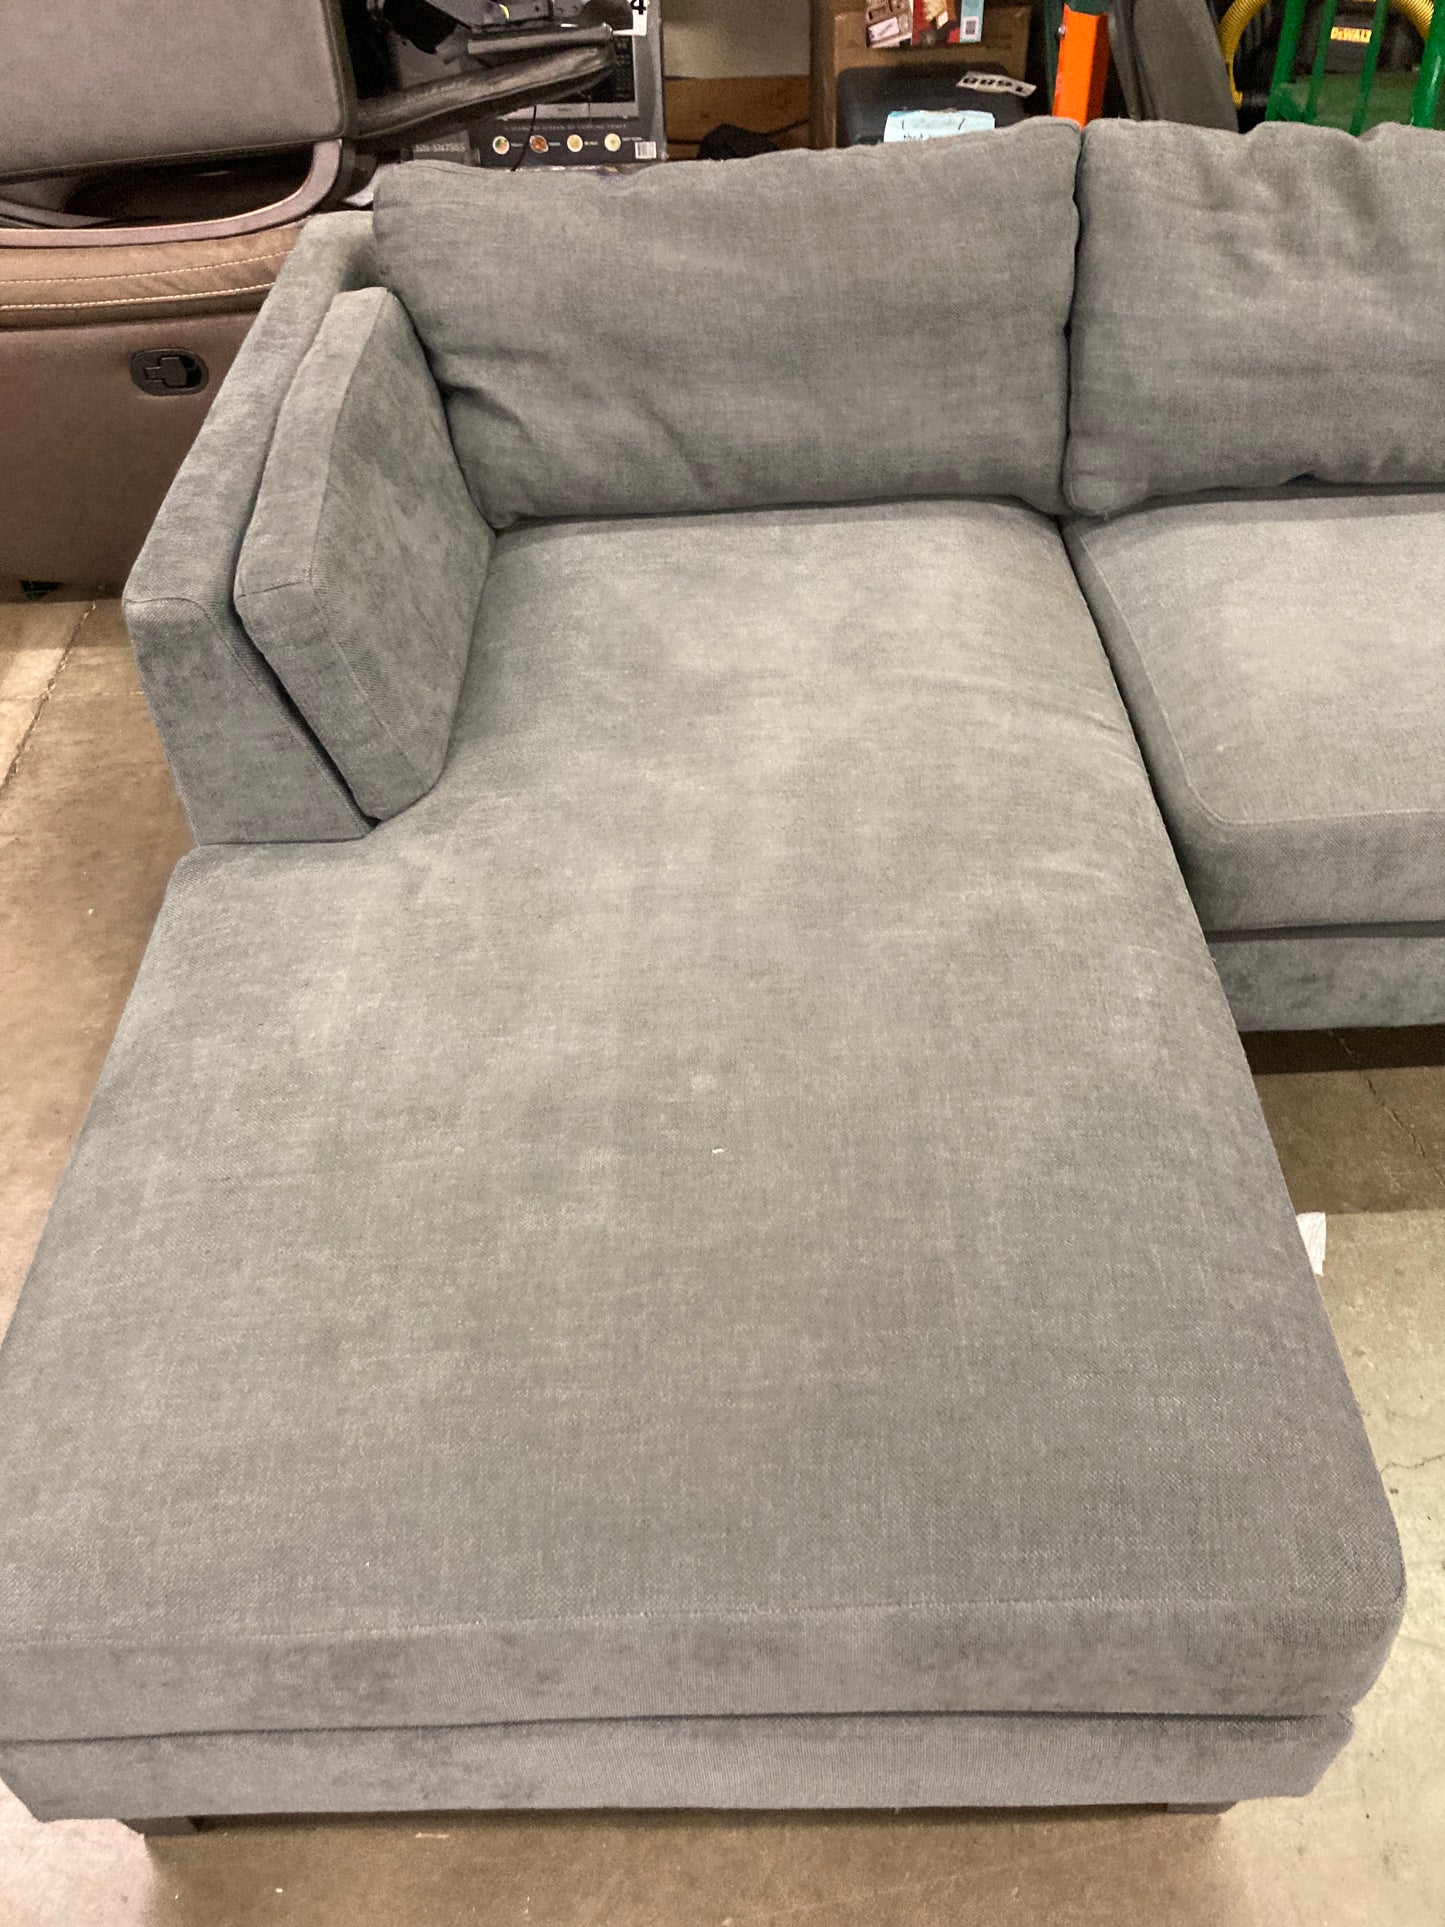 Costco - Ellery Fabric Sectional with Ottoman - Retail $799